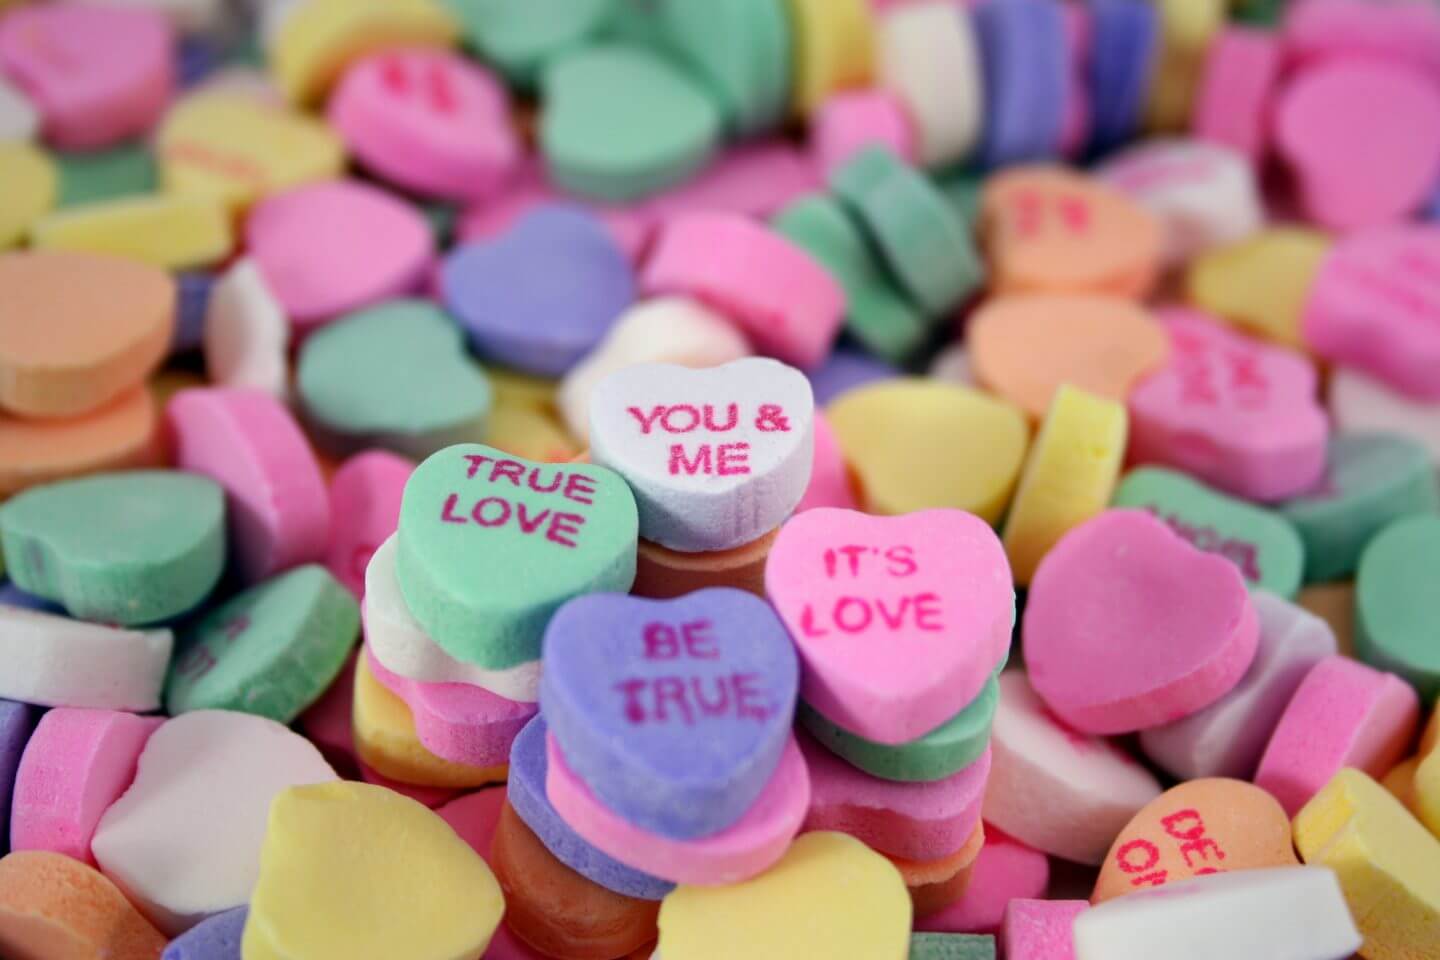 Make Your Own Sweethearts for Your Sweetheart